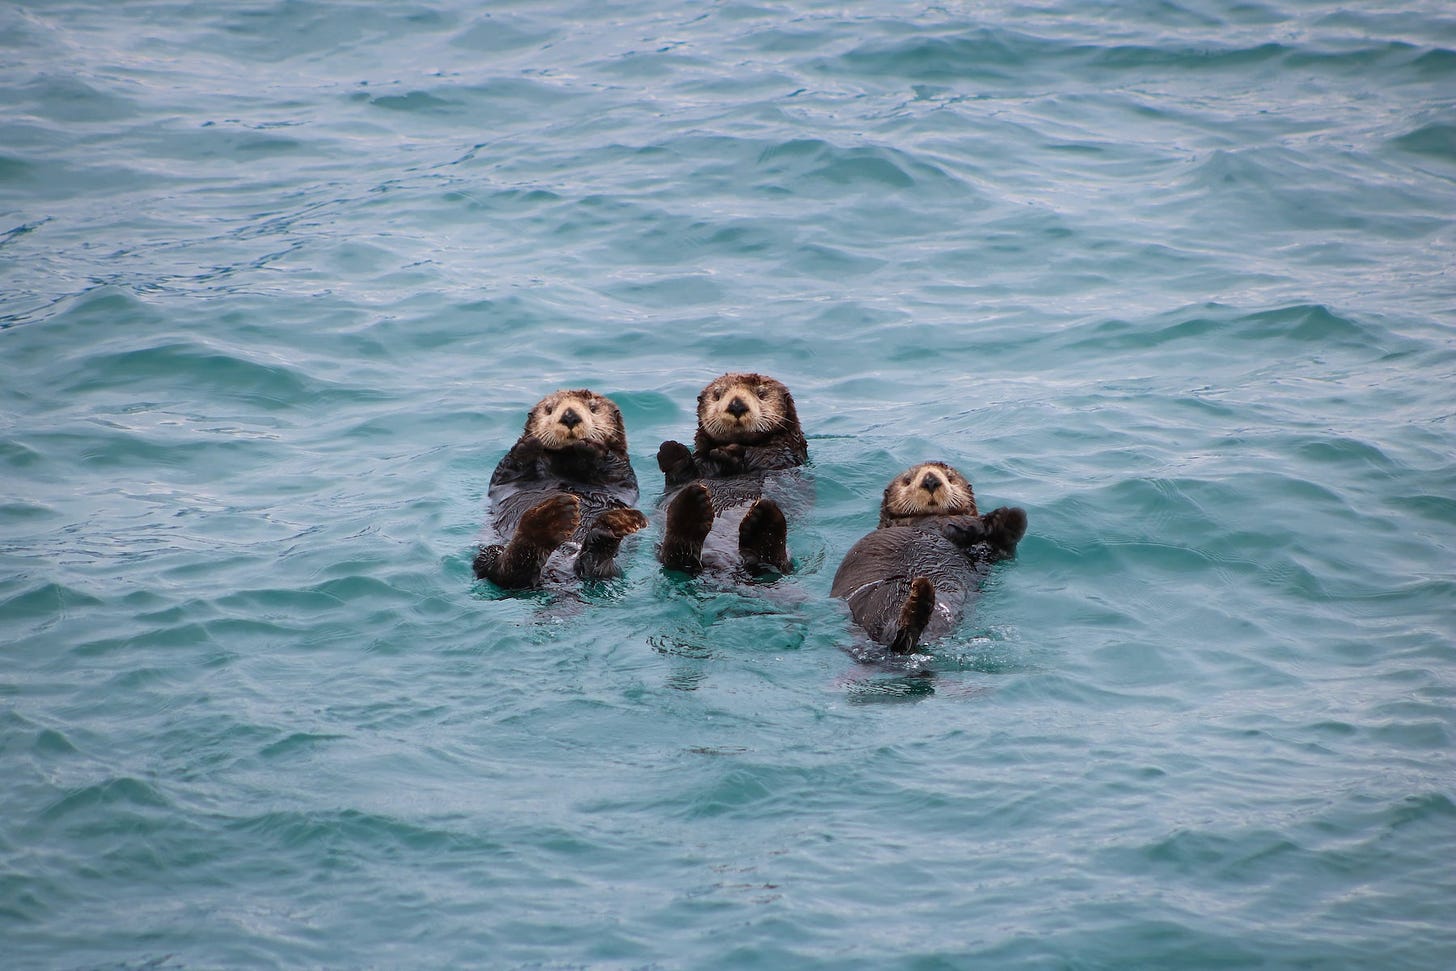 Three otters float on their backs in grayish blue water. They all have their back flippers in the air, looking at the camera, and all three appear to be waving at the camera.